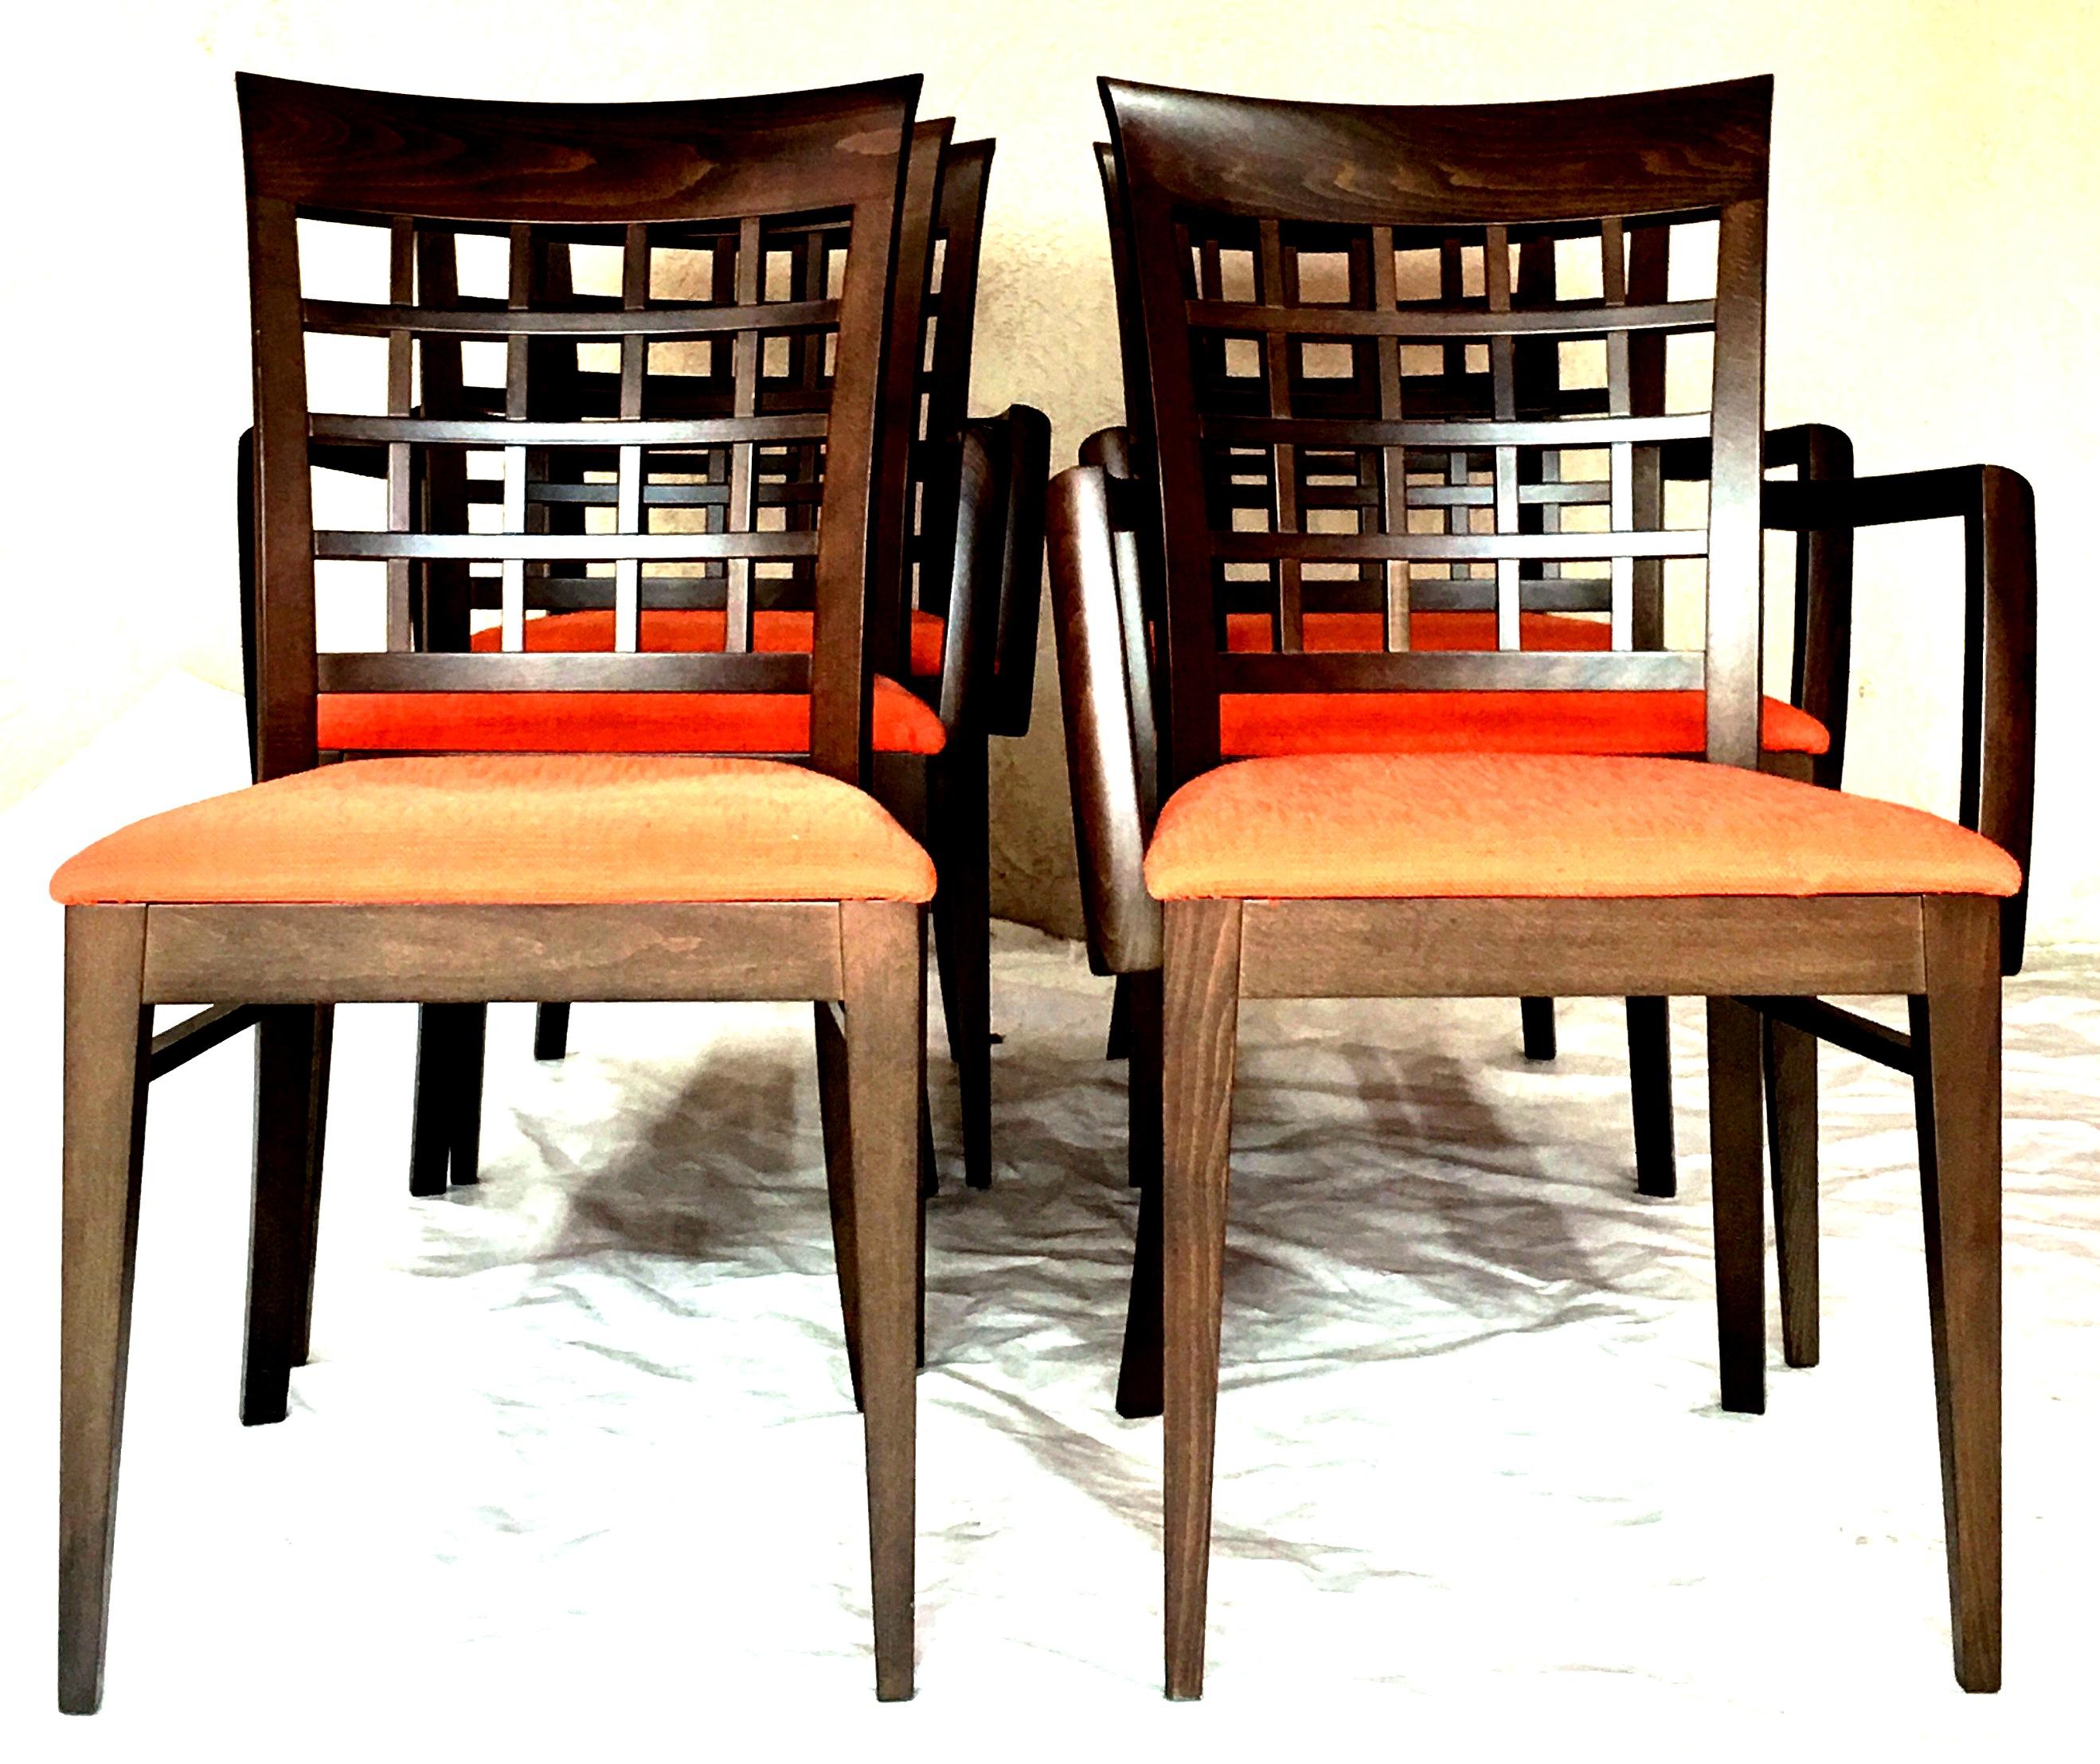 21st century Italian contemporary and modern upholstered dining chairs By, Potocco Spa for Roche Bobois. Features a dark mahogany stain solid wood frame with an orange linen blend upholstery fabric.
These like new, never used, contemporary set of